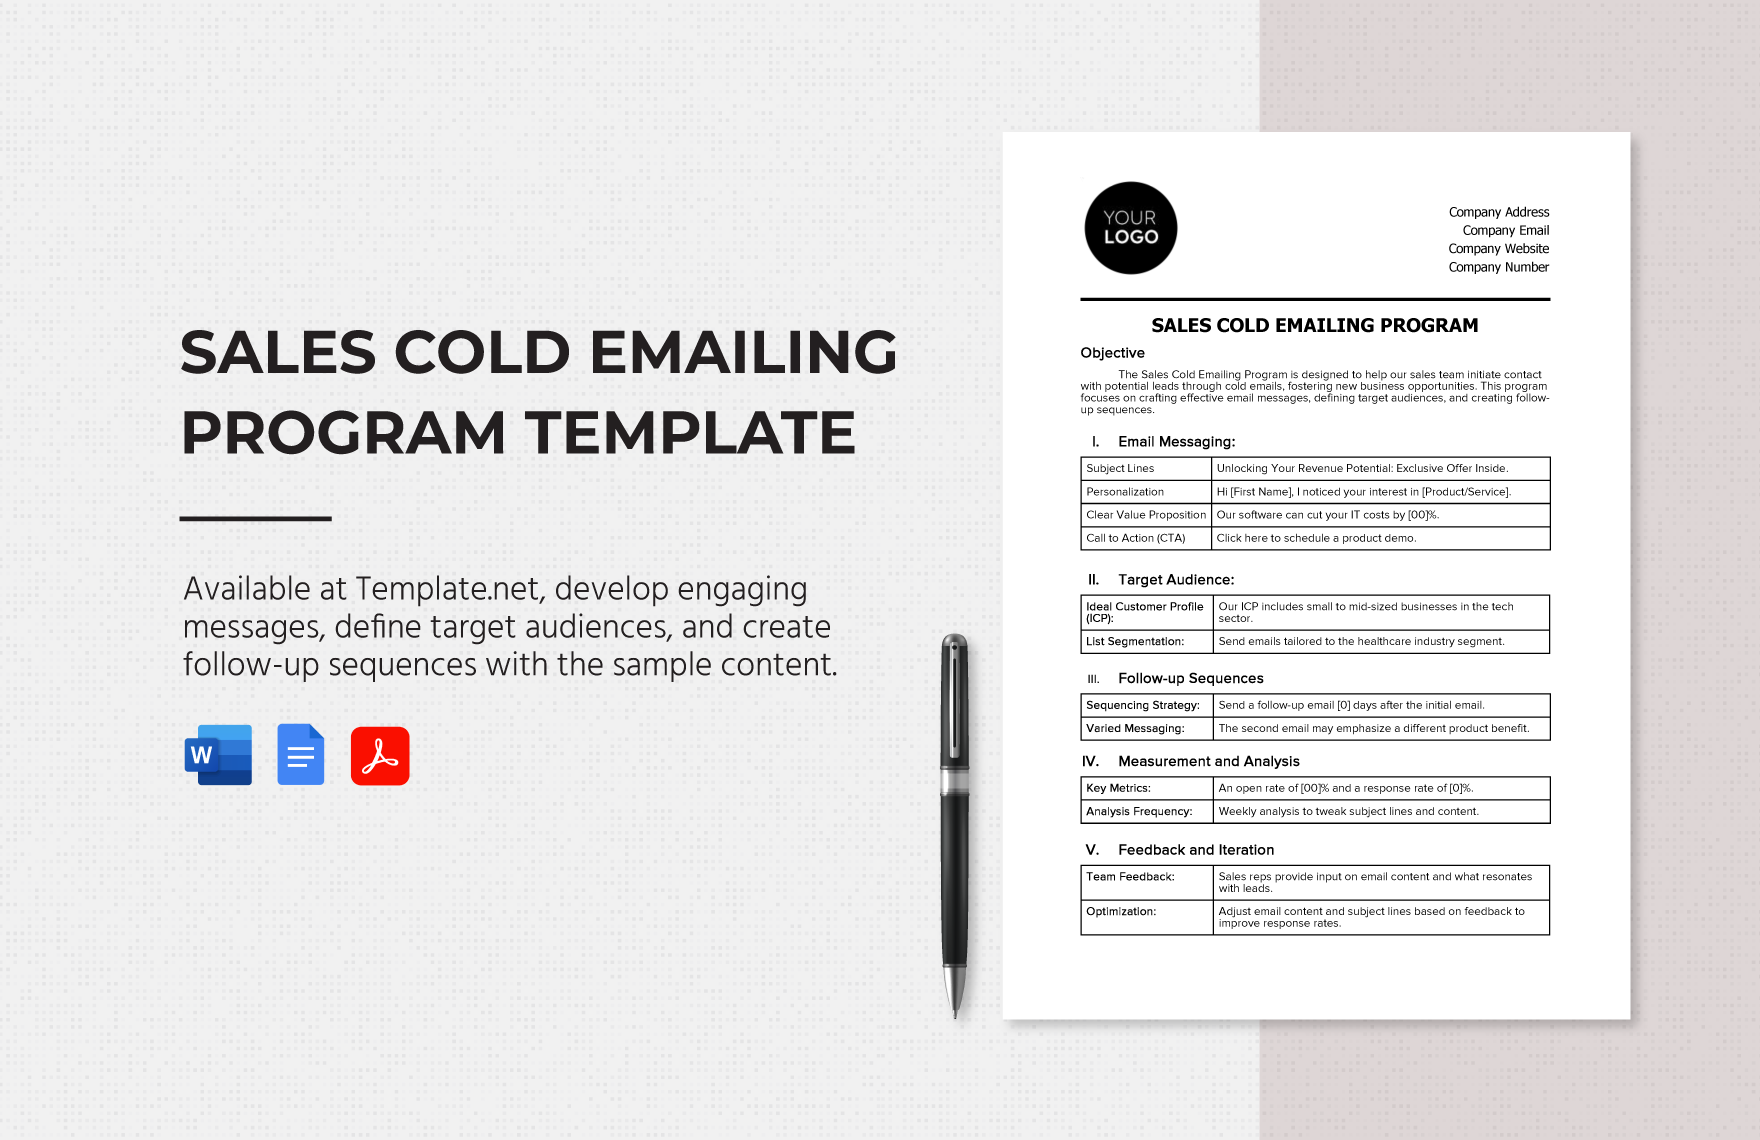 Sales Cold Emailing Program Template in Word, Google Docs, PDF